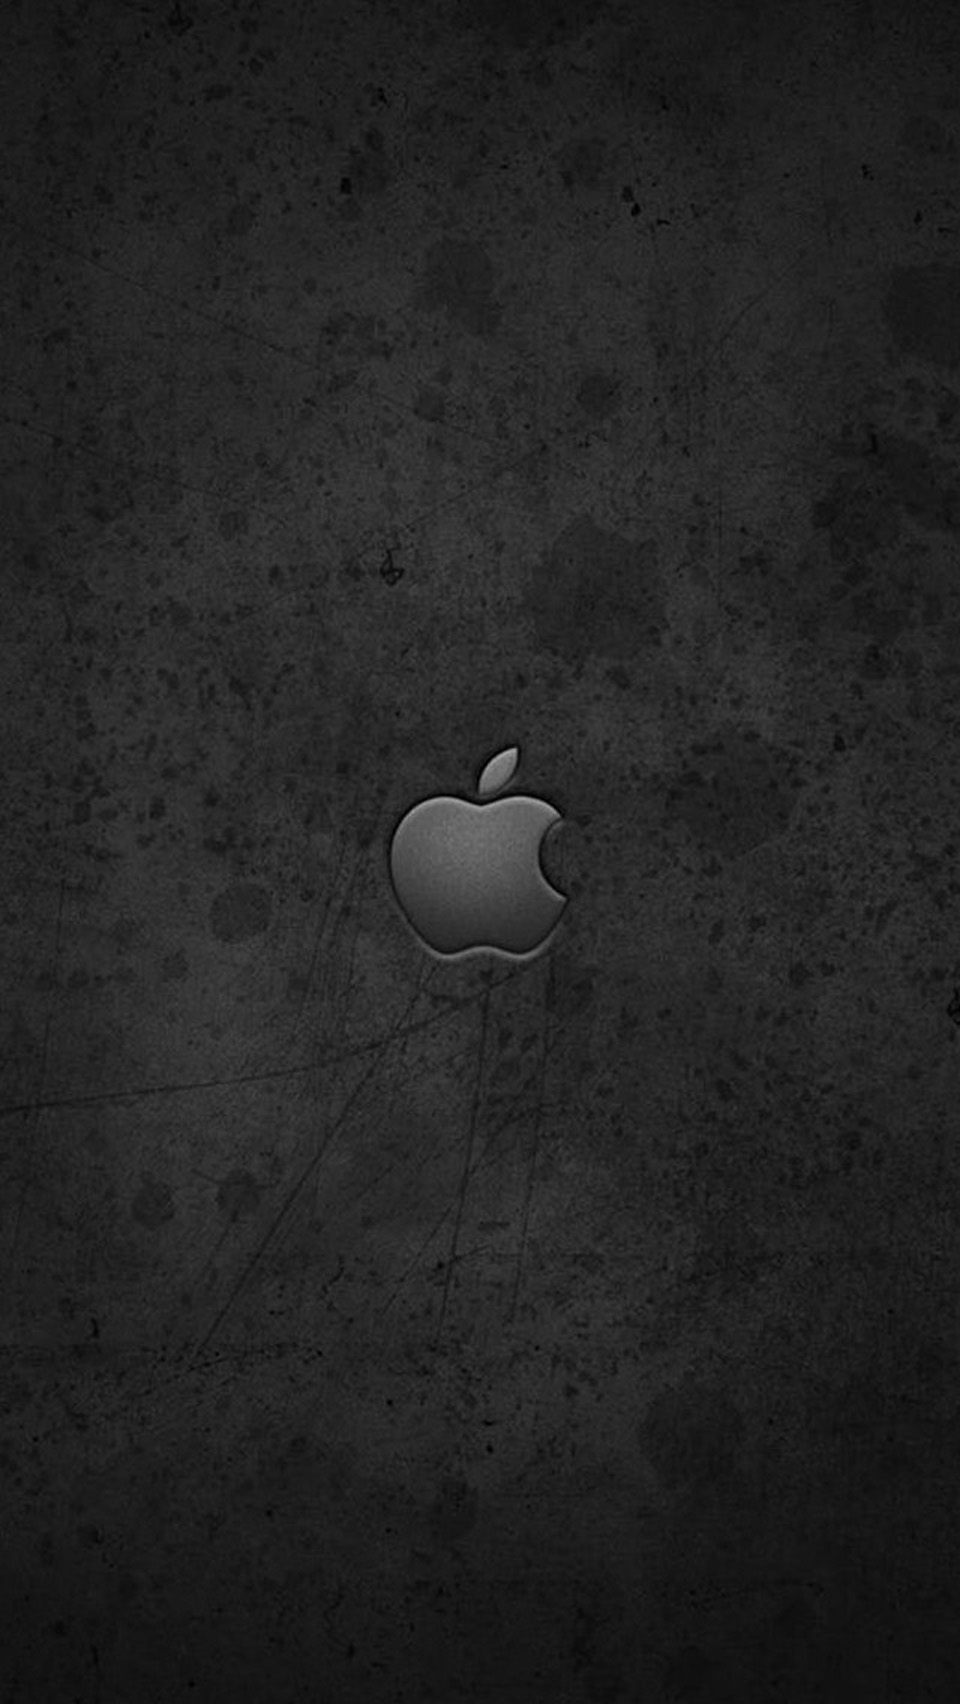 Black Apple Logo Wallpaper For iPhone Photos Of